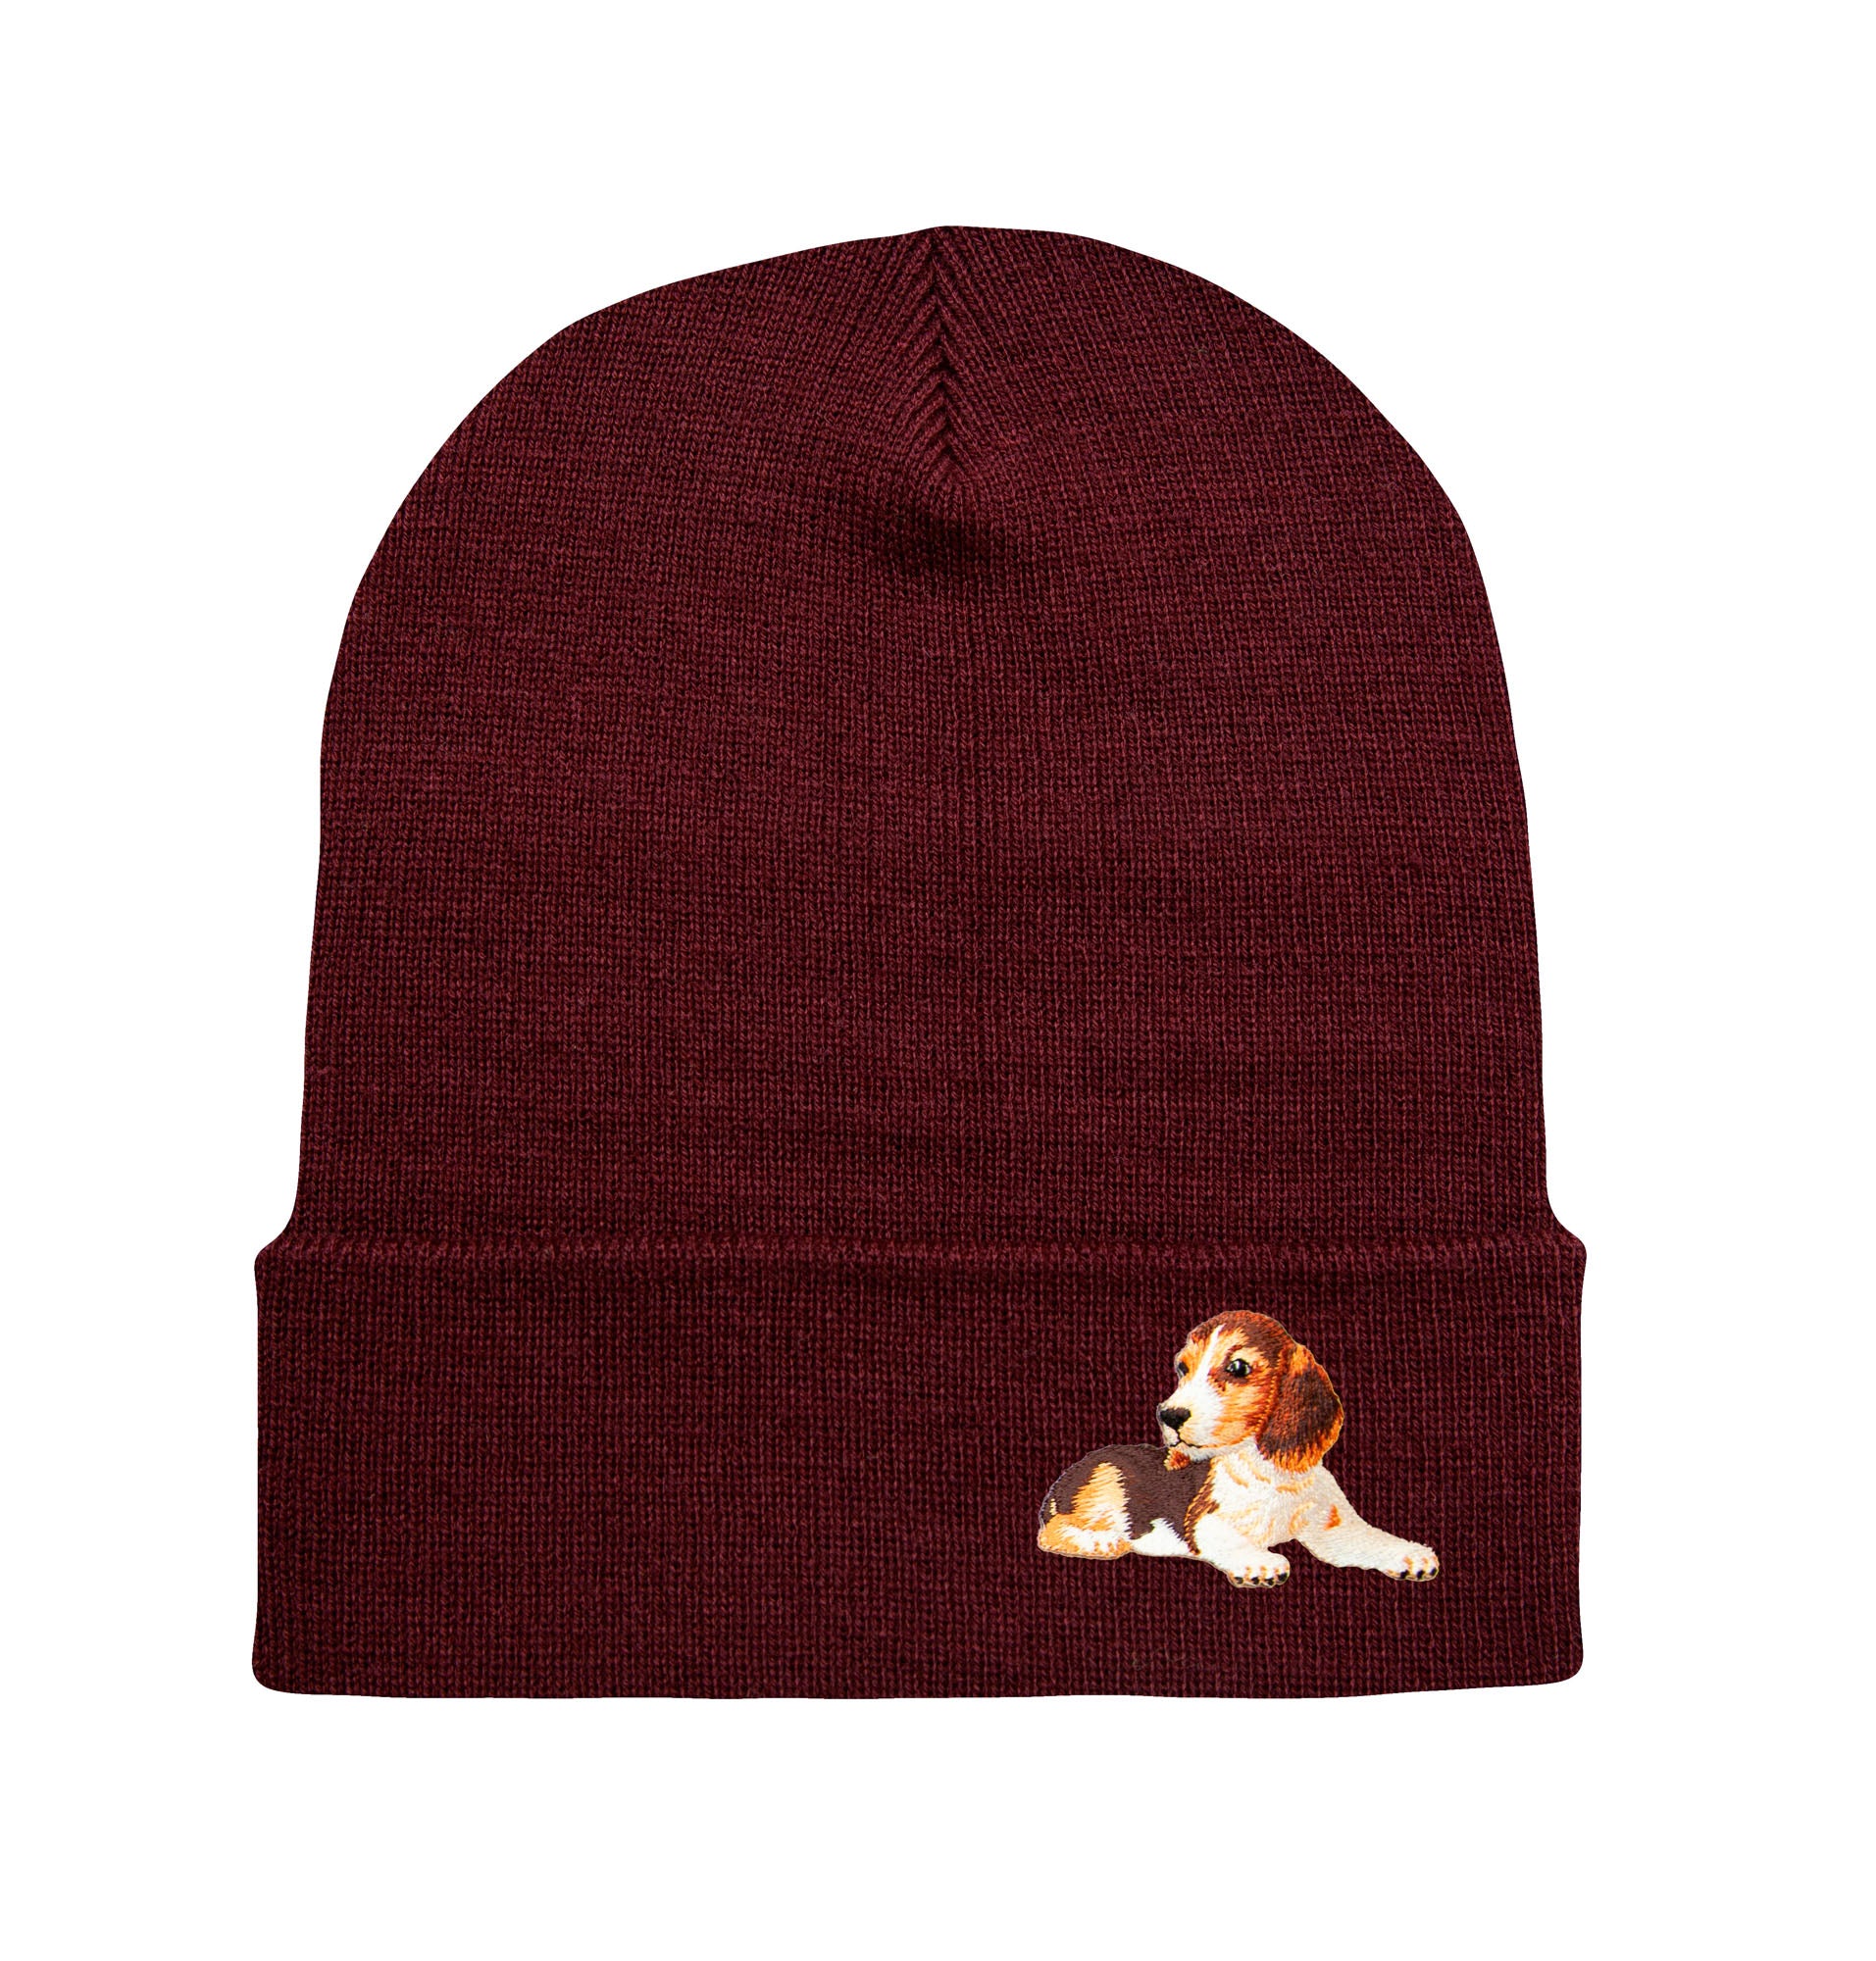 The Hat - Maroon